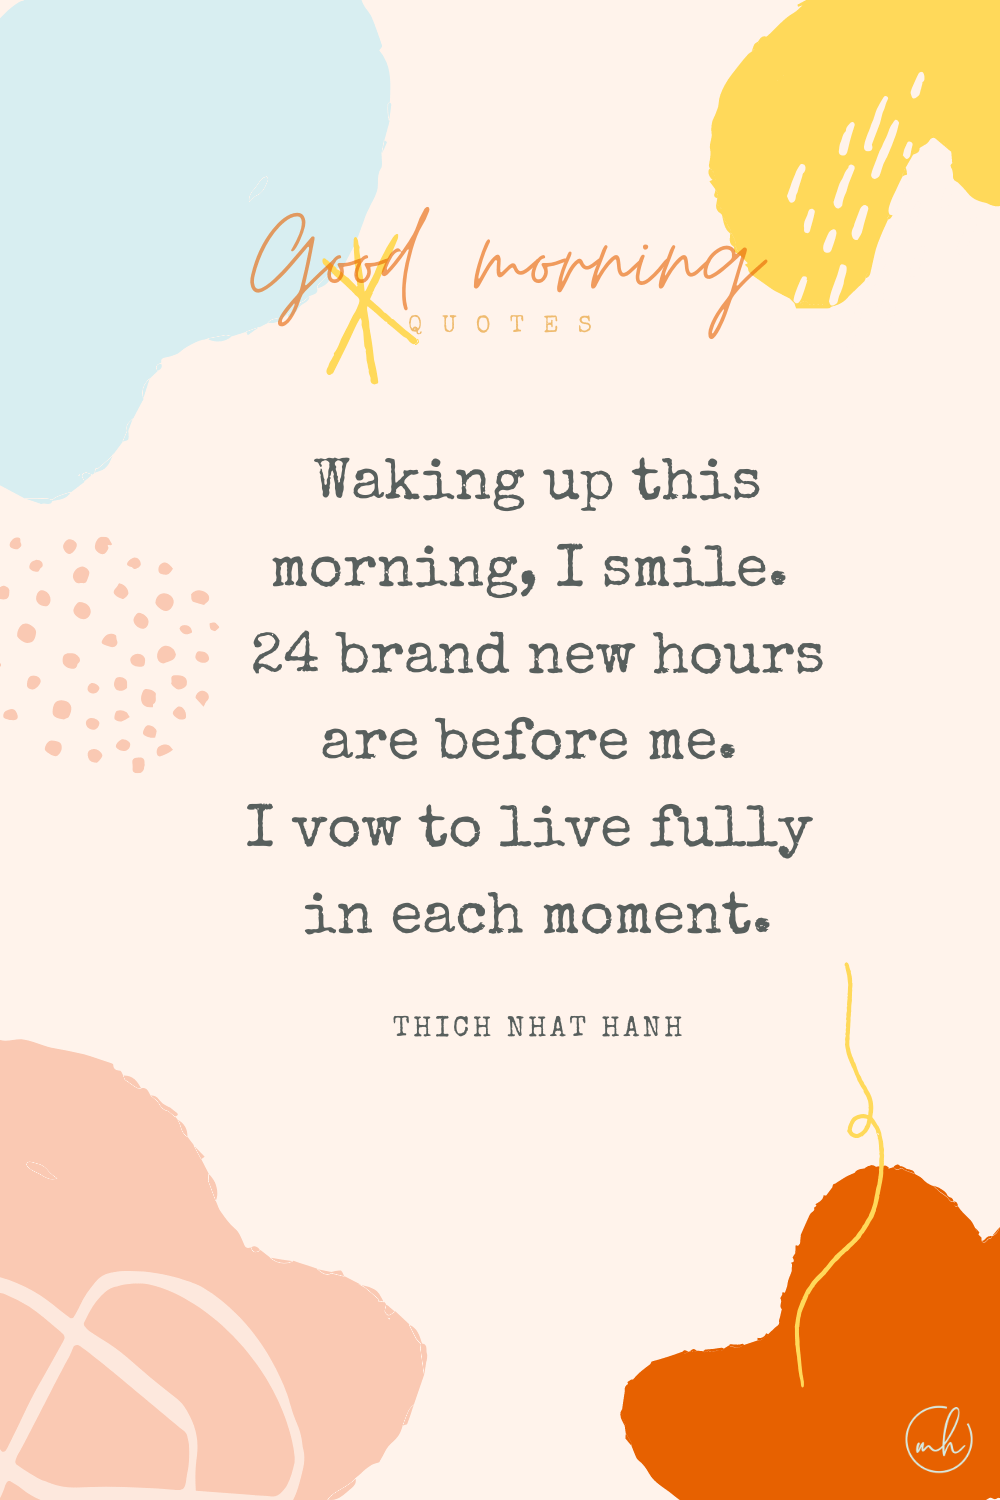 "Waking up this morning, I smile. 24 brand new hours are before me. I vow to live fully in each moment." – Thich Nhat Hanh